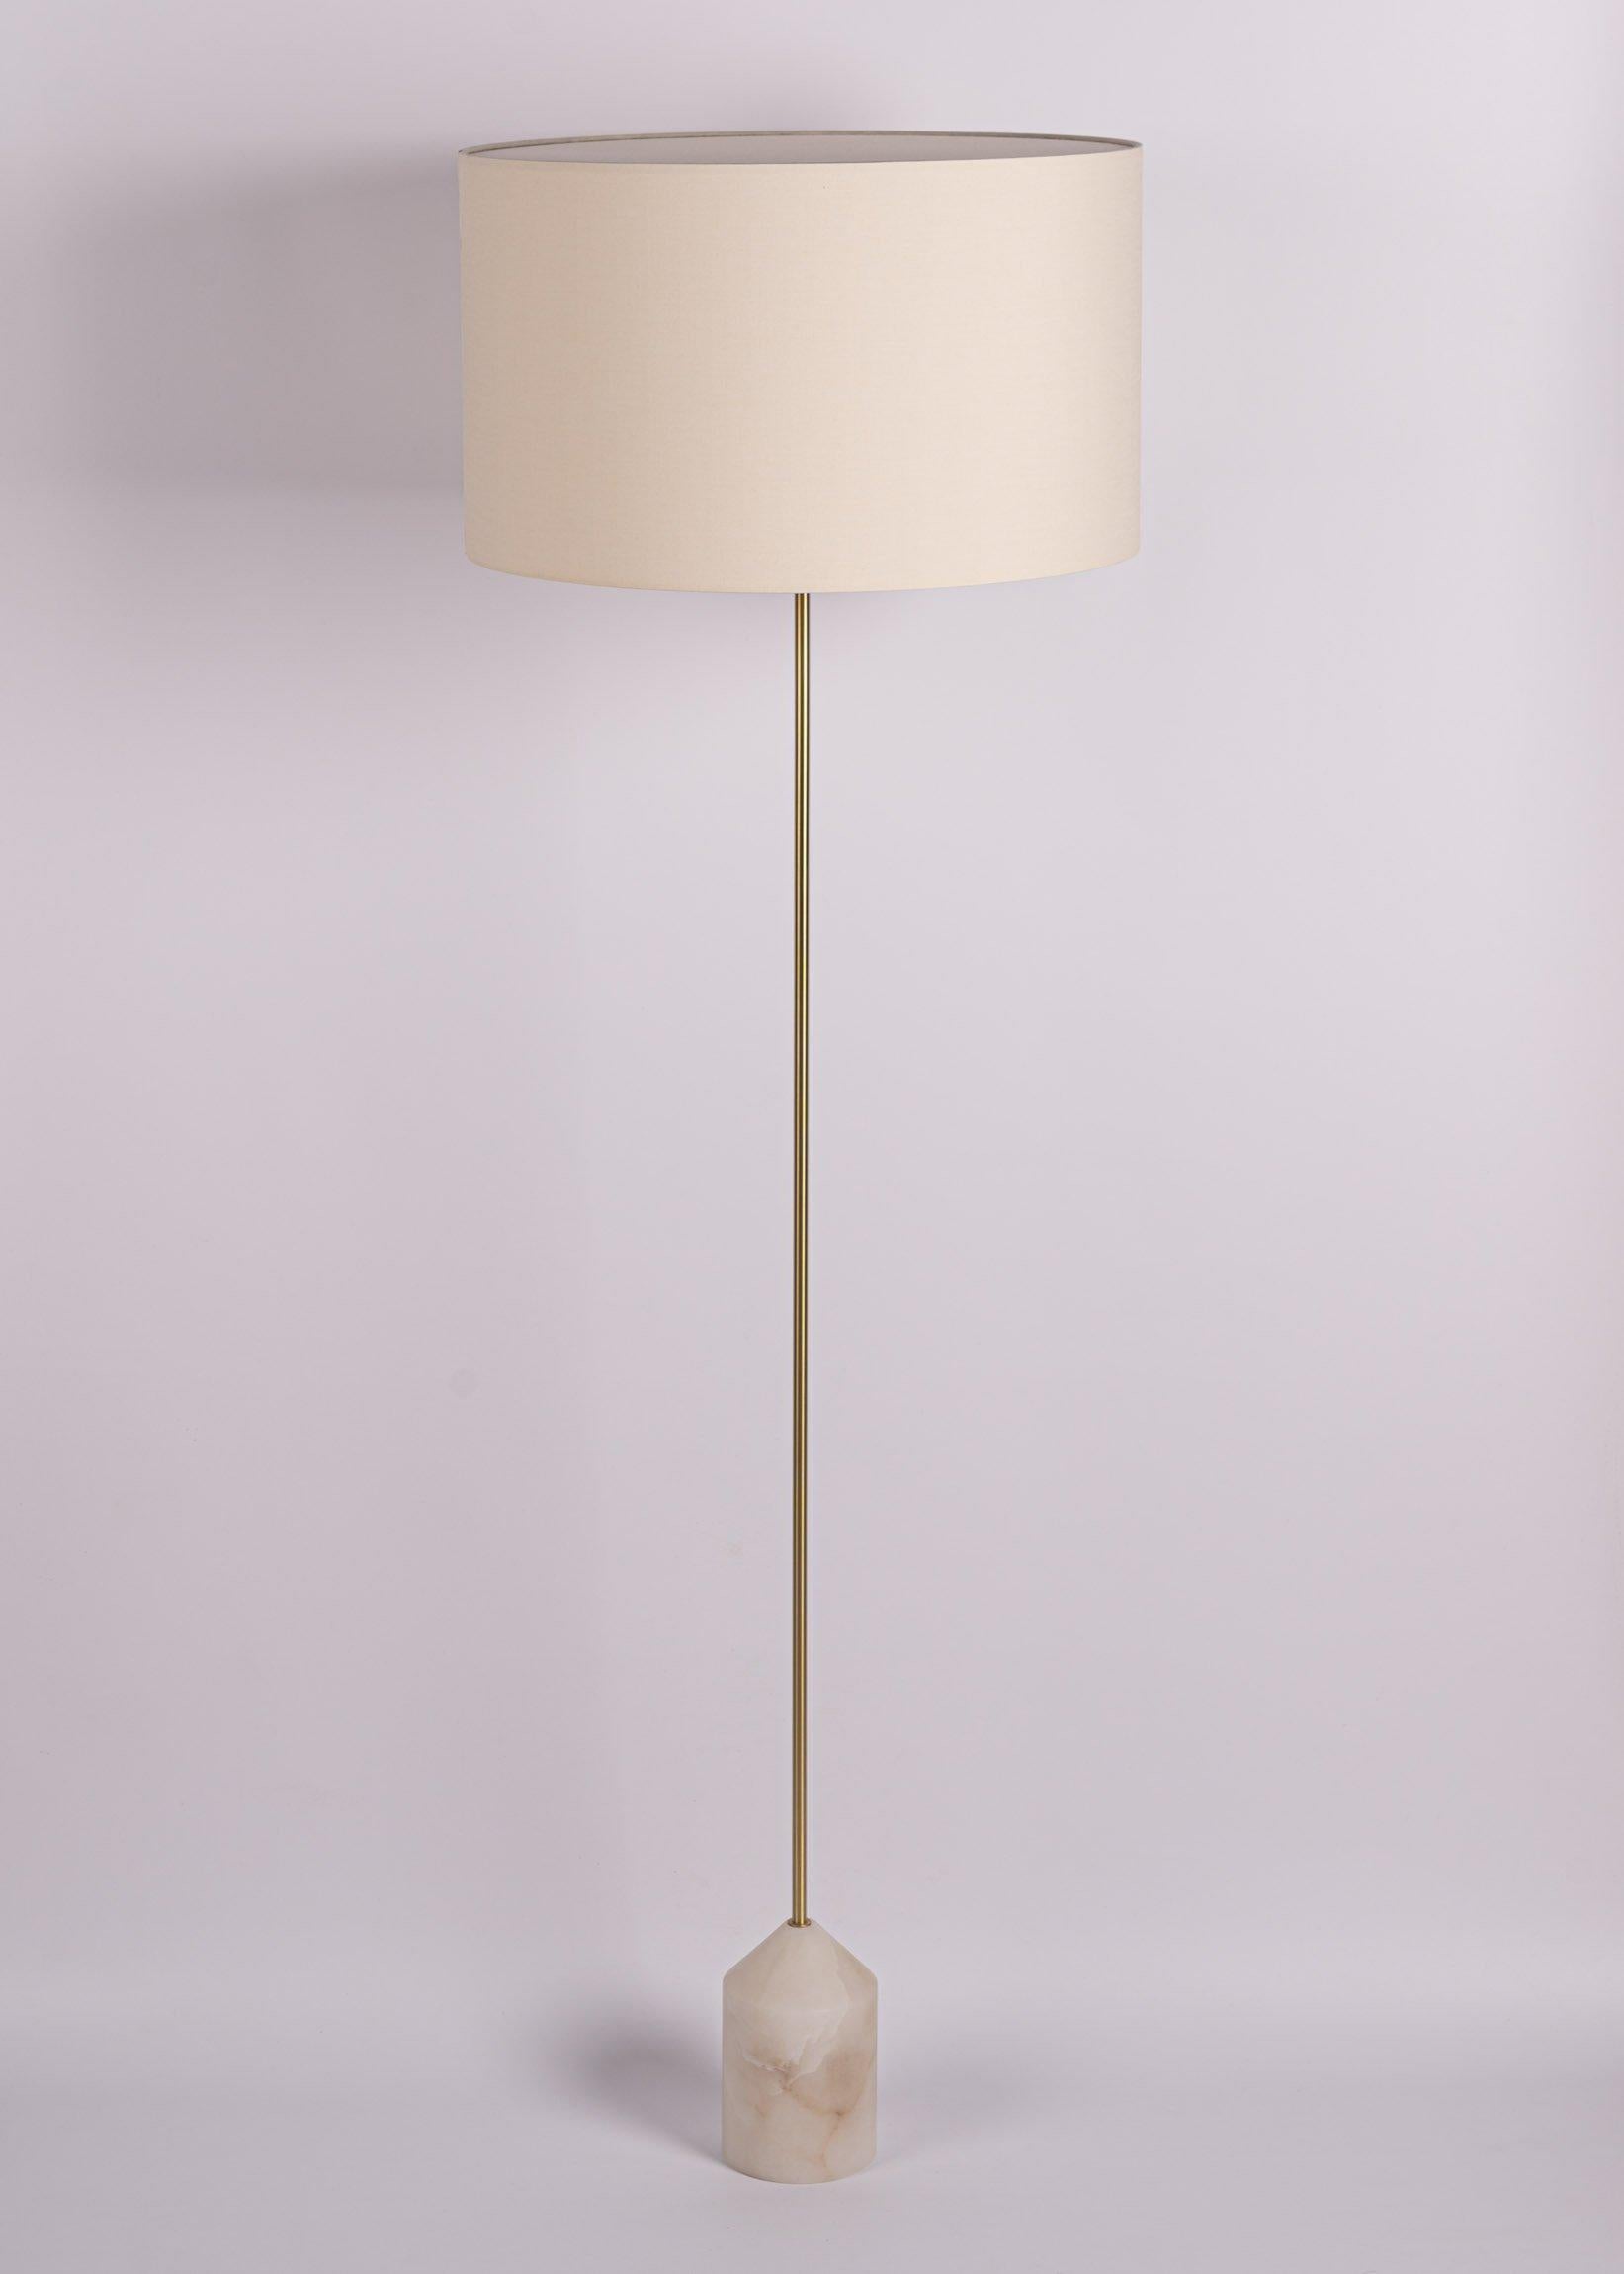 Baleto White Alabaster Floor Lamp by Simone & Marcel
Dimensions: D 50 x W 50 x H 166 cm.
Materials: Brass, cotton and white alabaster.

Also available in different marble and alabaster options and finishes. Custom options available on request.